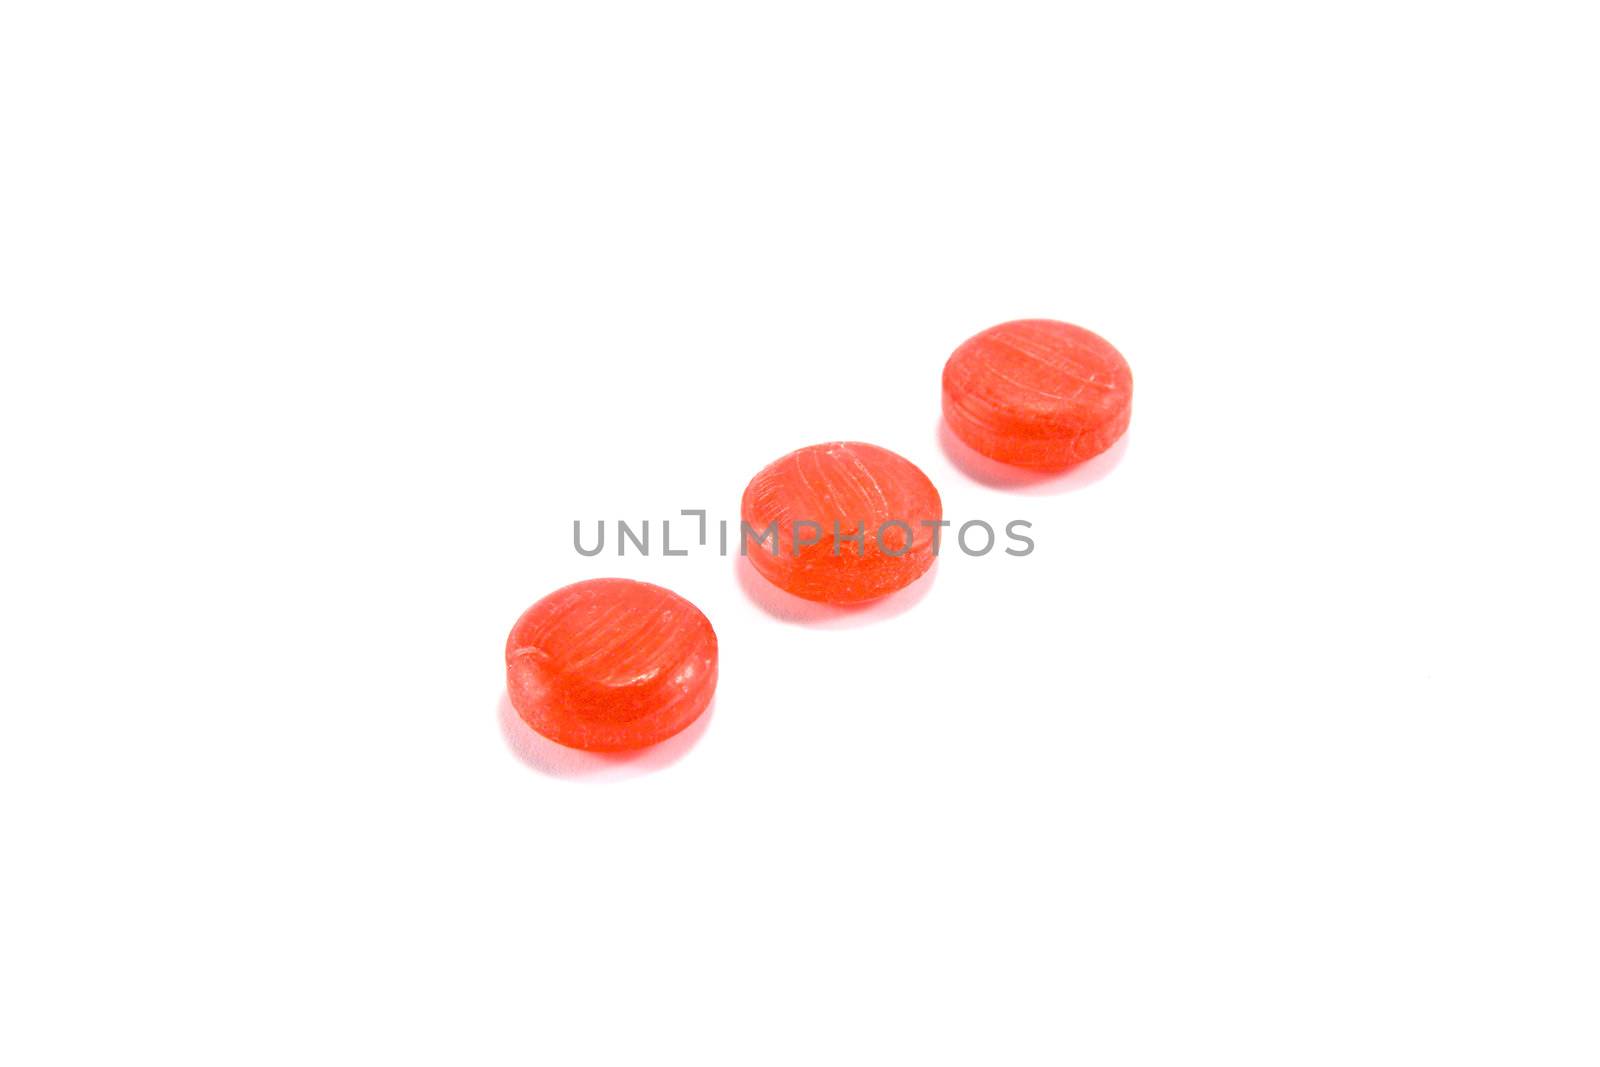 Three red sweets in a line on a white background